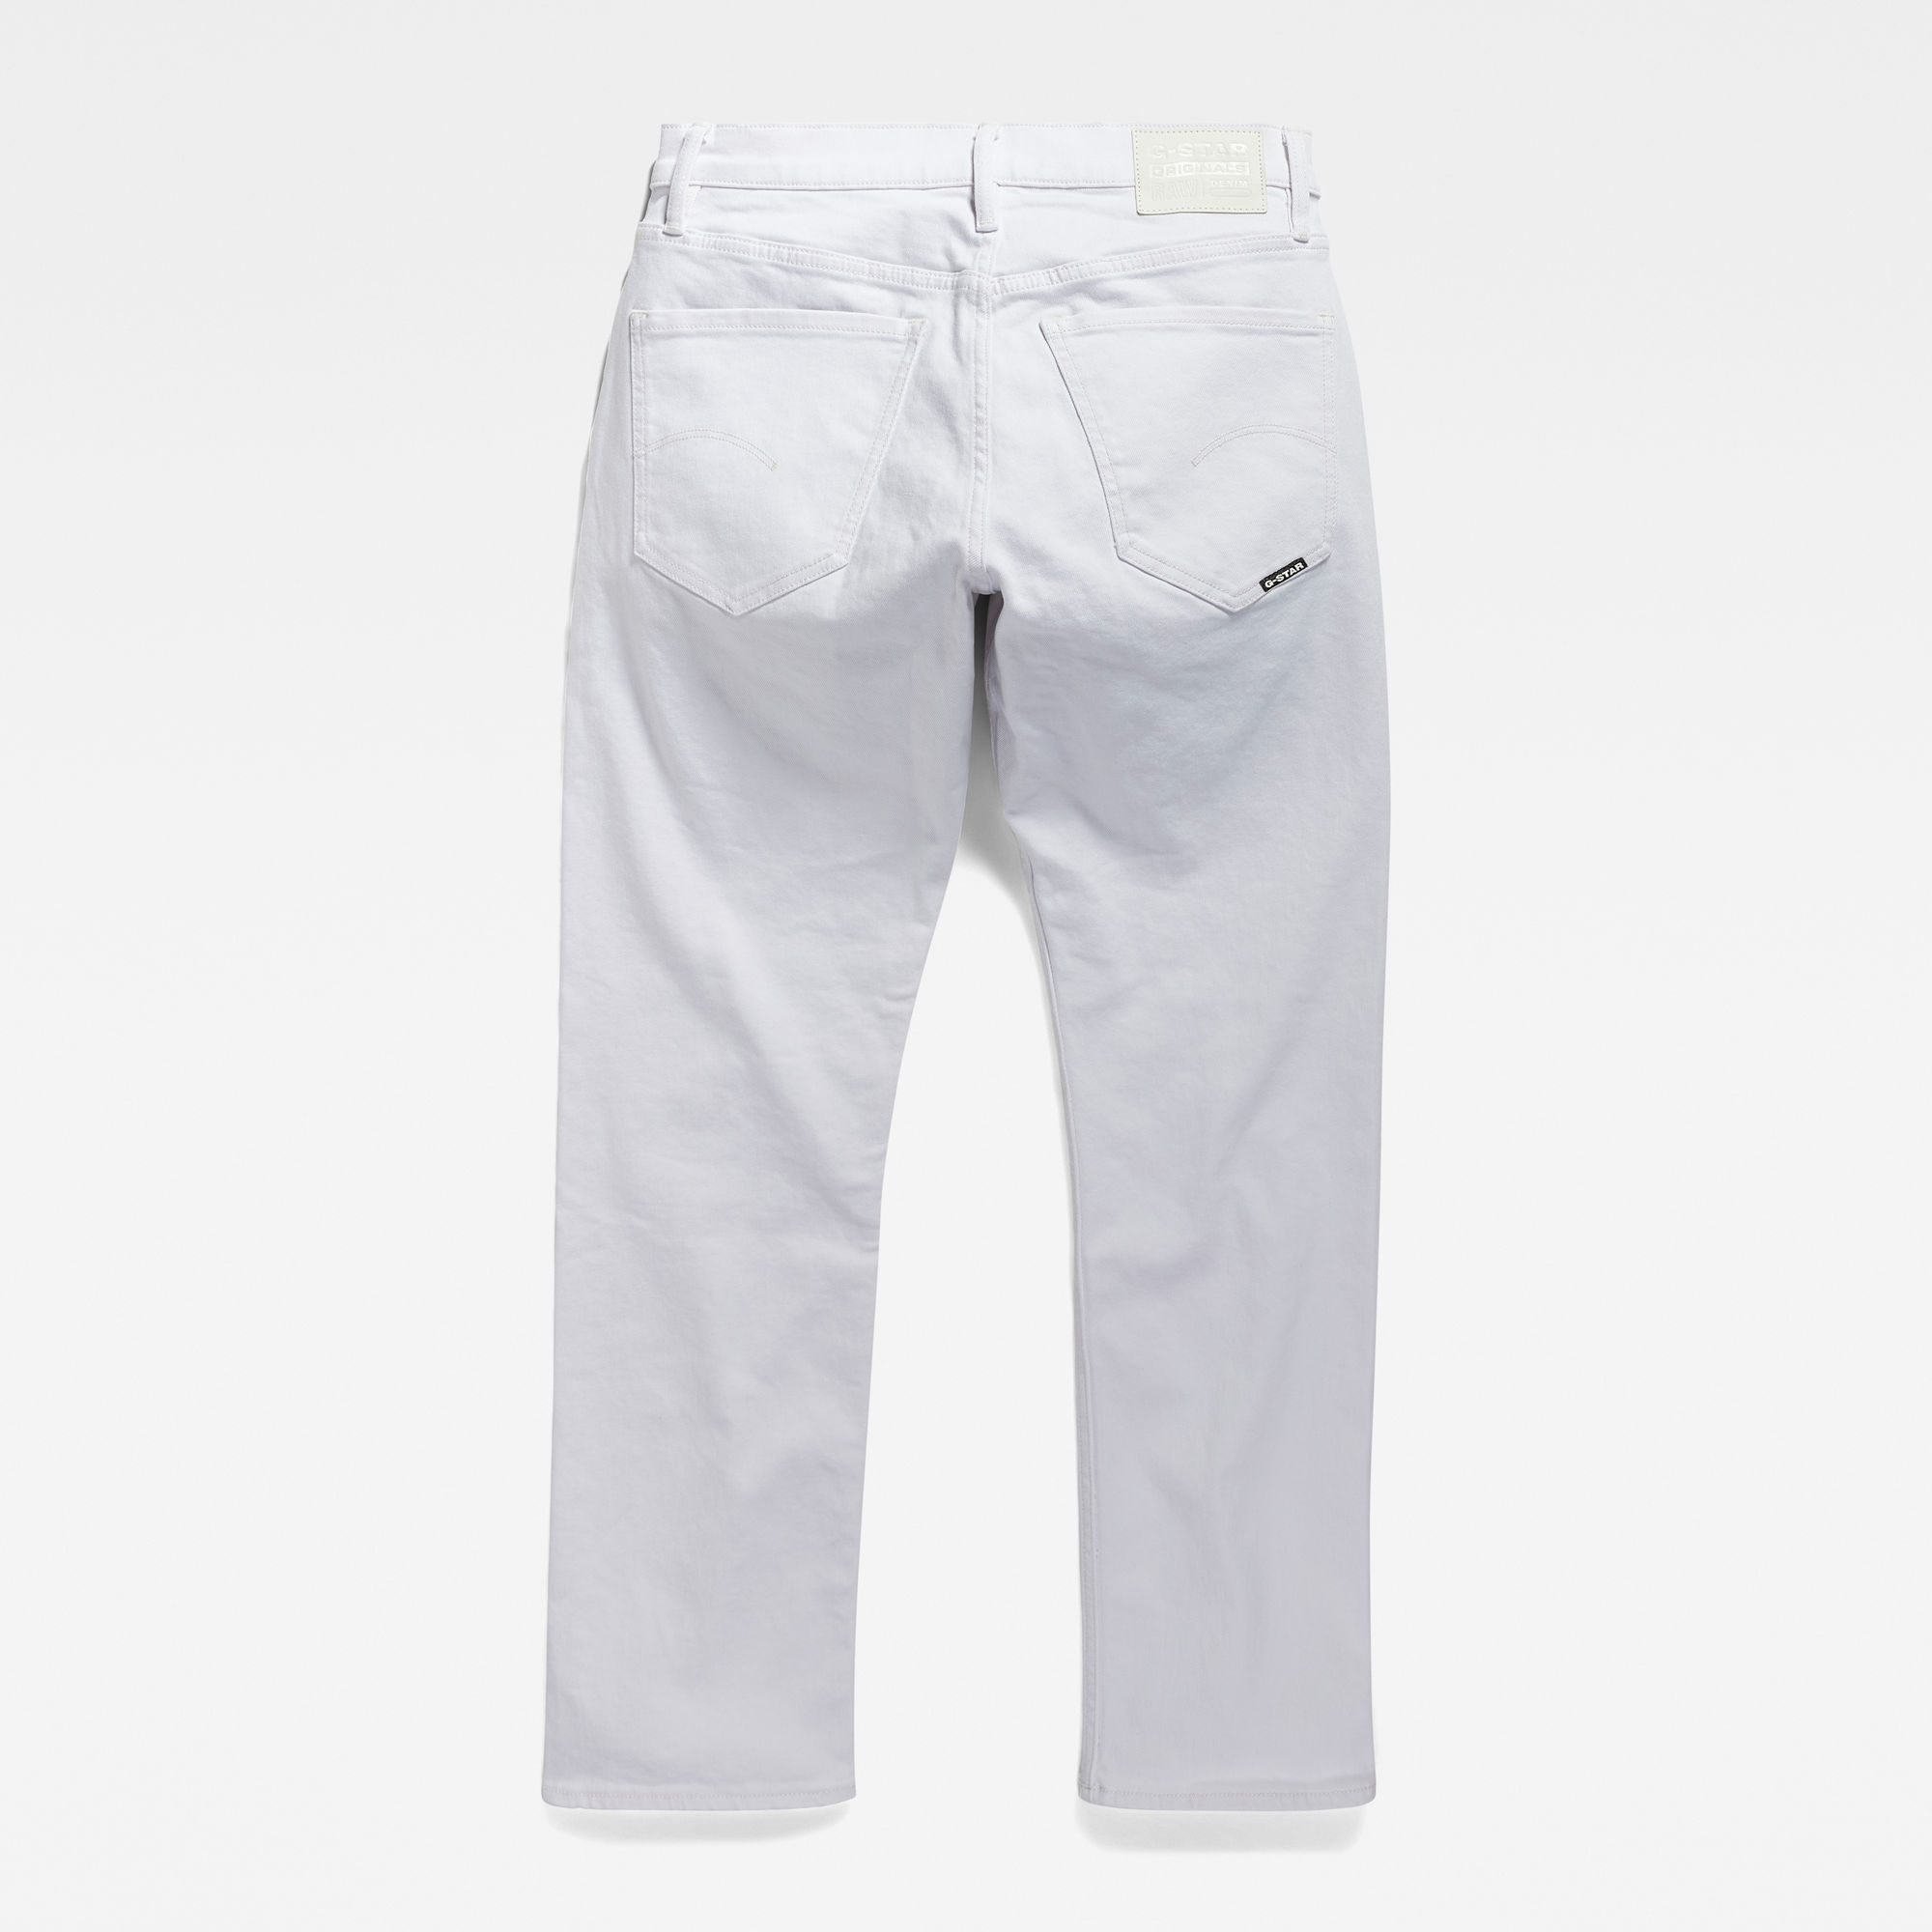 G-Star RAW Mosa Straight Jeans Wit Heren